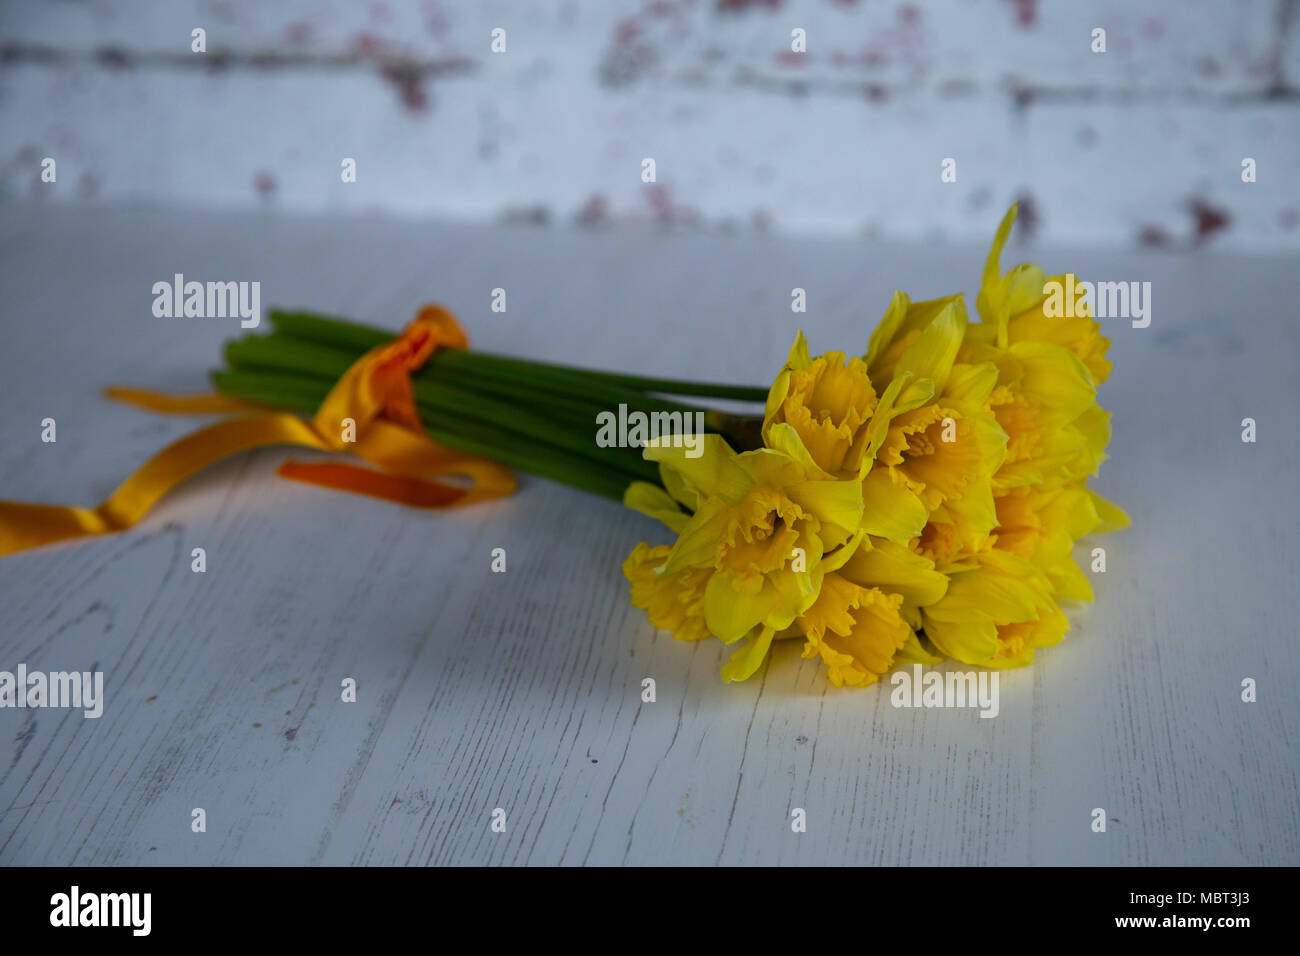 A bunch of daffodils tied with an orange ribbon placed on a white laminate floor. Stock Photo